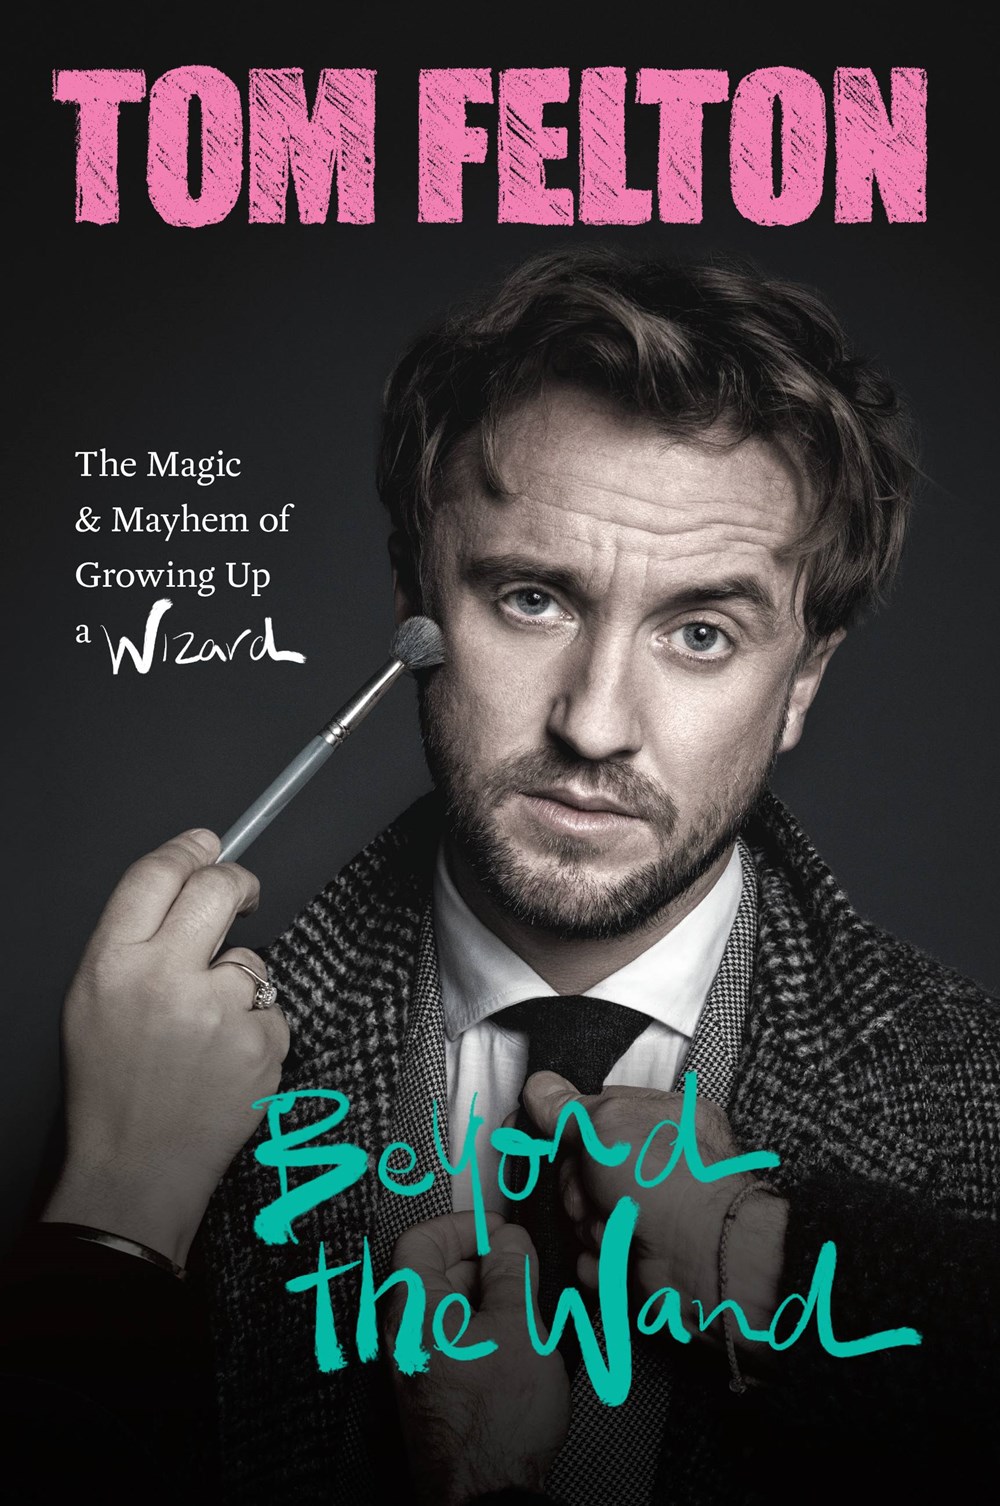 Book Review: Beyond the Wand by Tom Felton